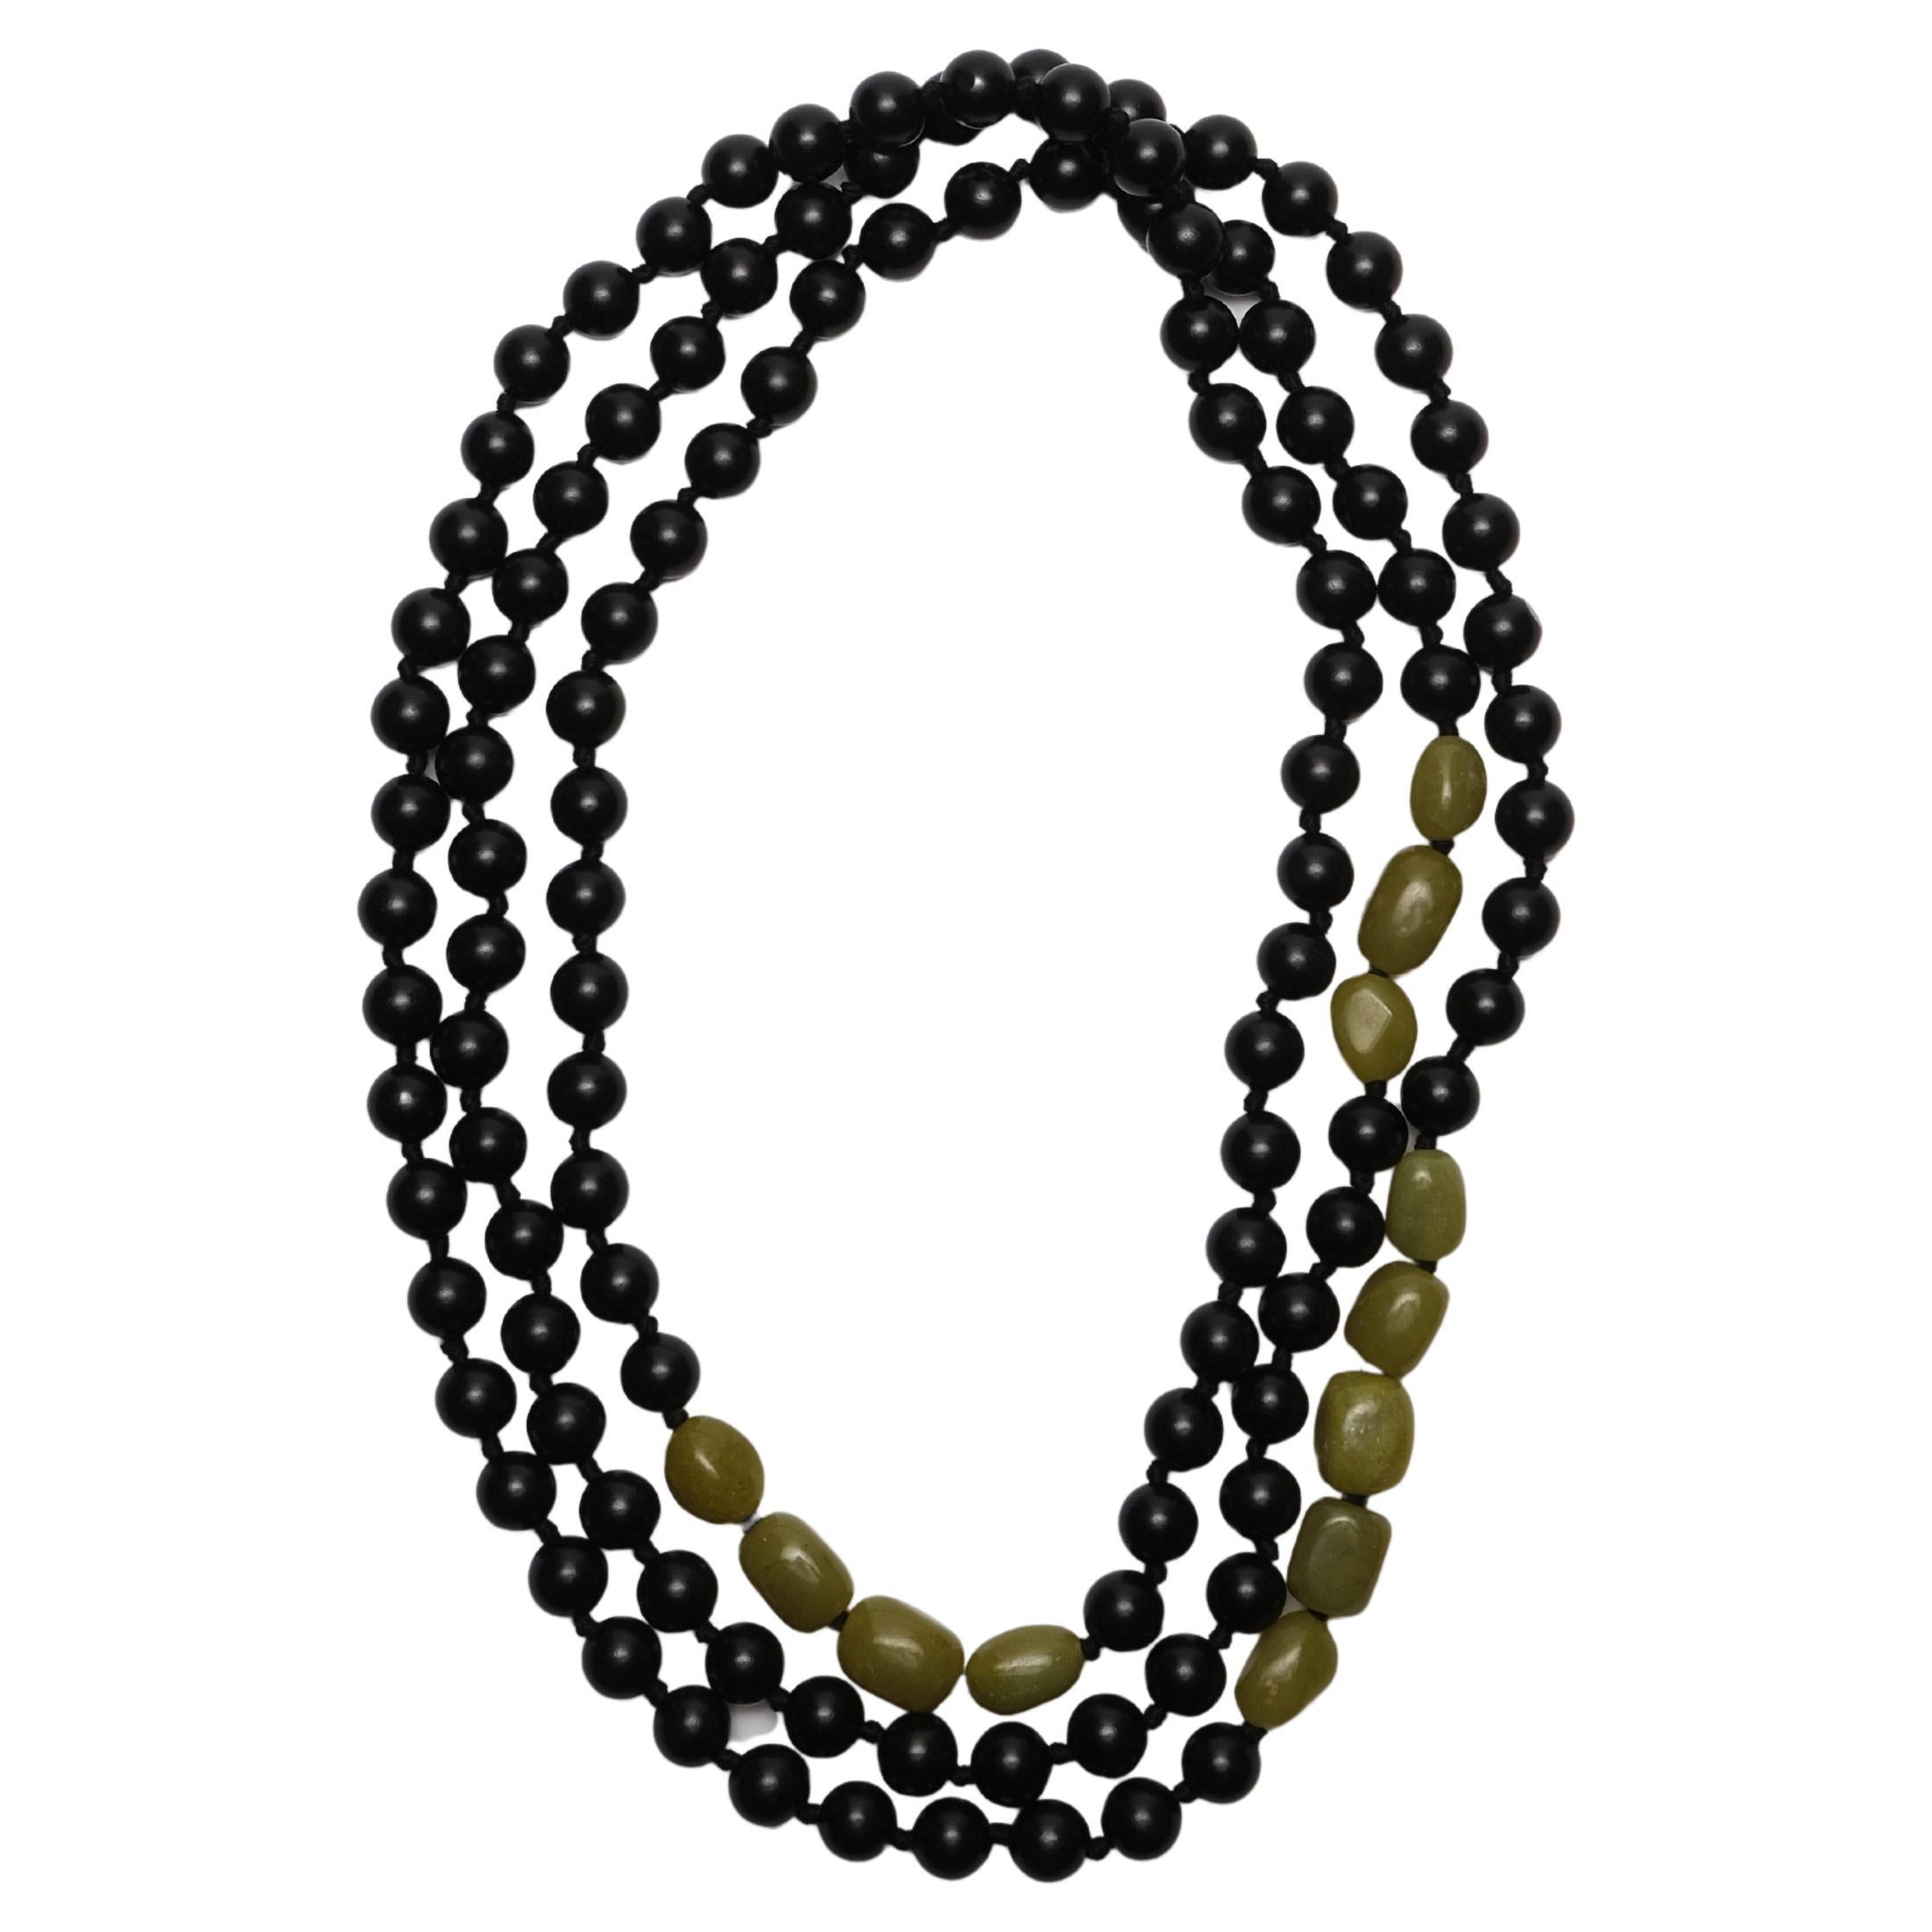 One-of-a-kind Necklace in Serpentine & Ebony from the Danish Brand Monies For Sale